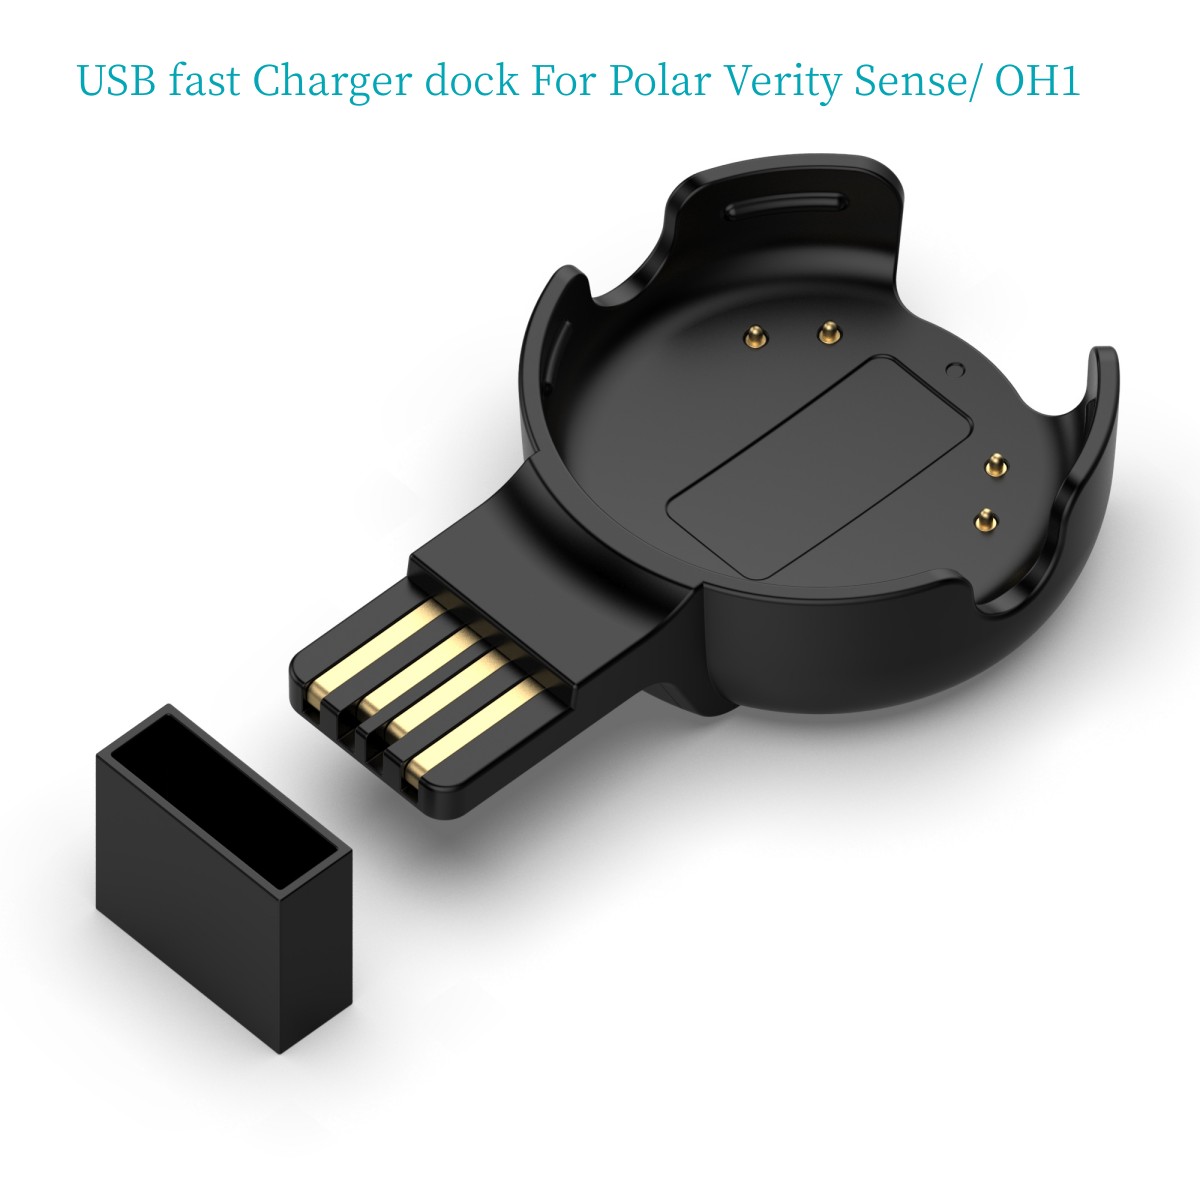 USB fast Charger dock For Polar Verity Sense OH1 Cradle Charging Smart Watch Charger